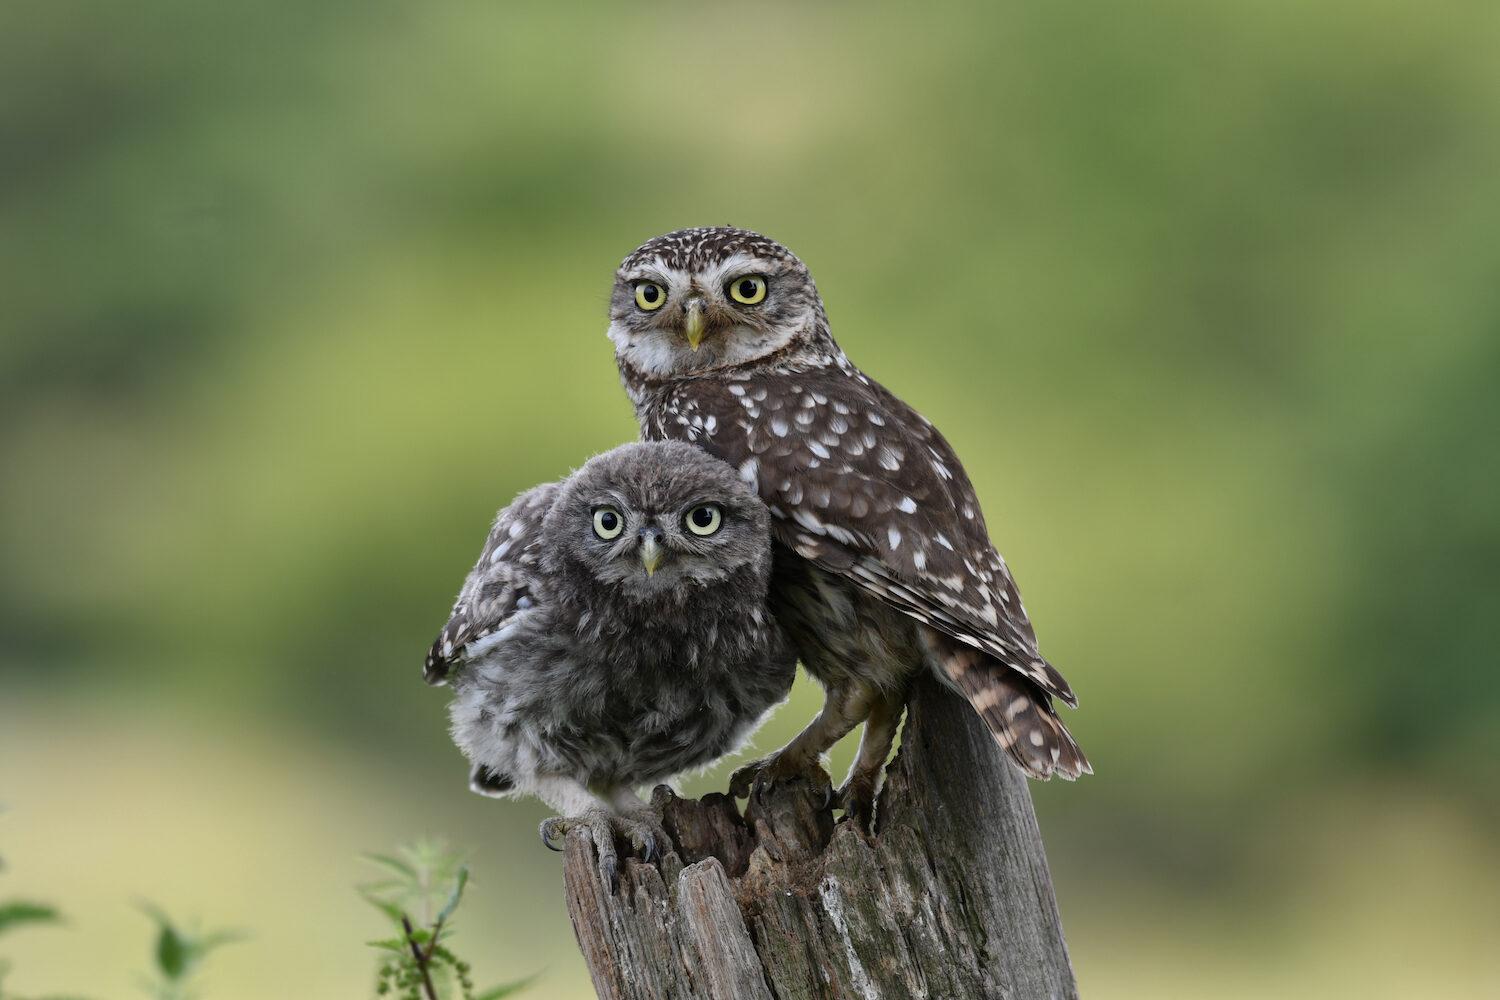 Little owls at the Knepp estate in Sussex